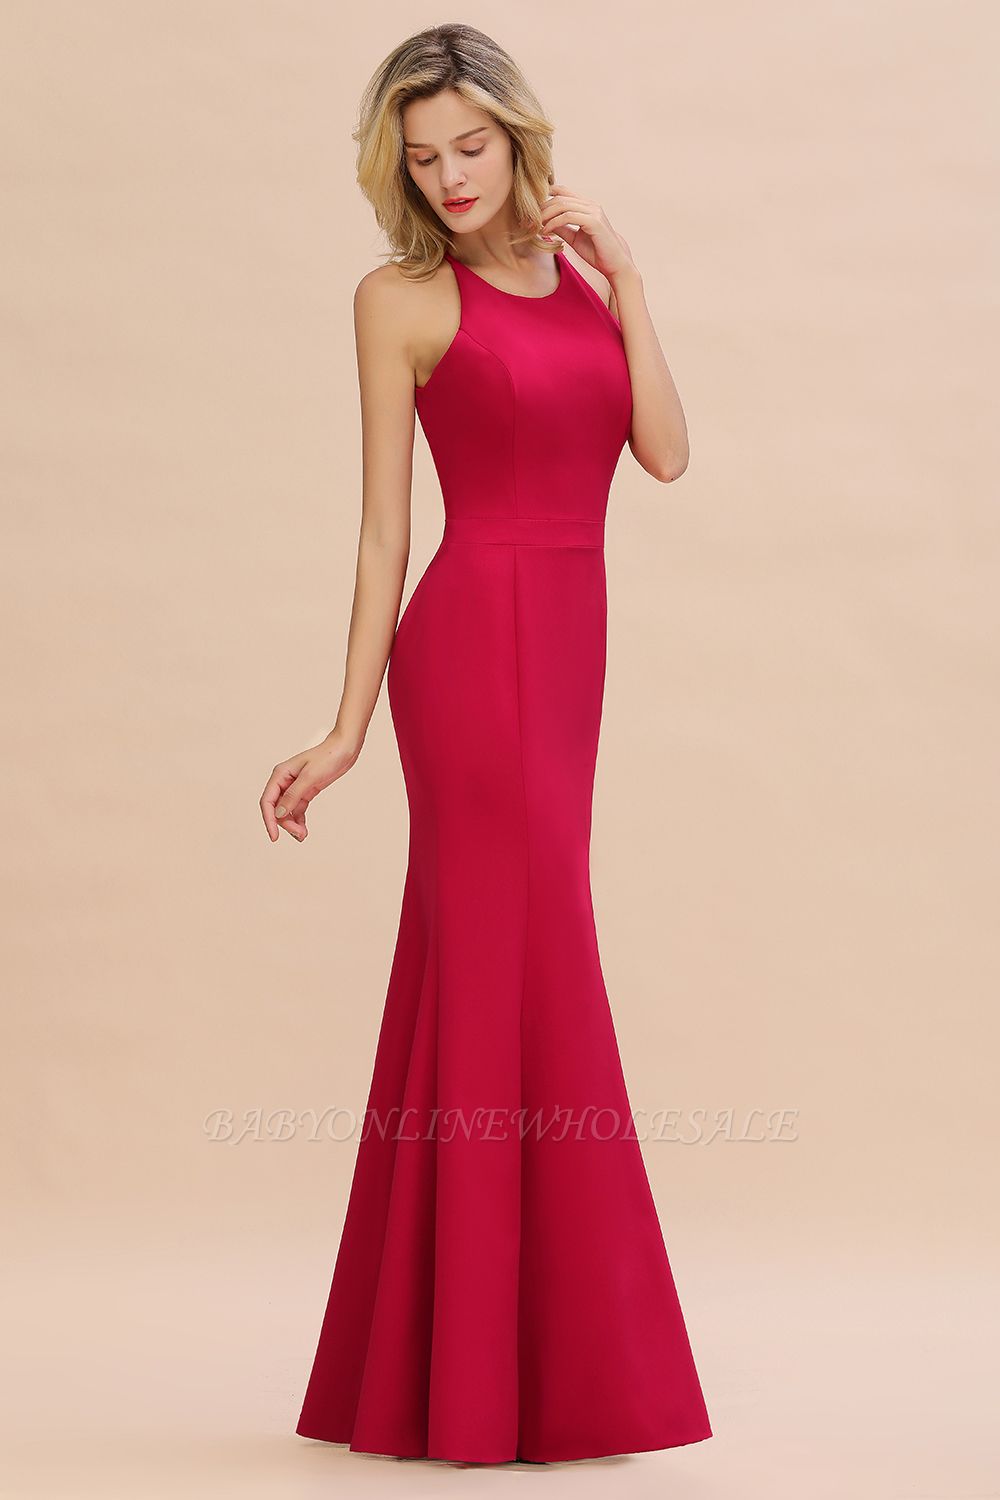 Sexy Halter Mermaid Evening Maxi Gown Side Slit Party Dress